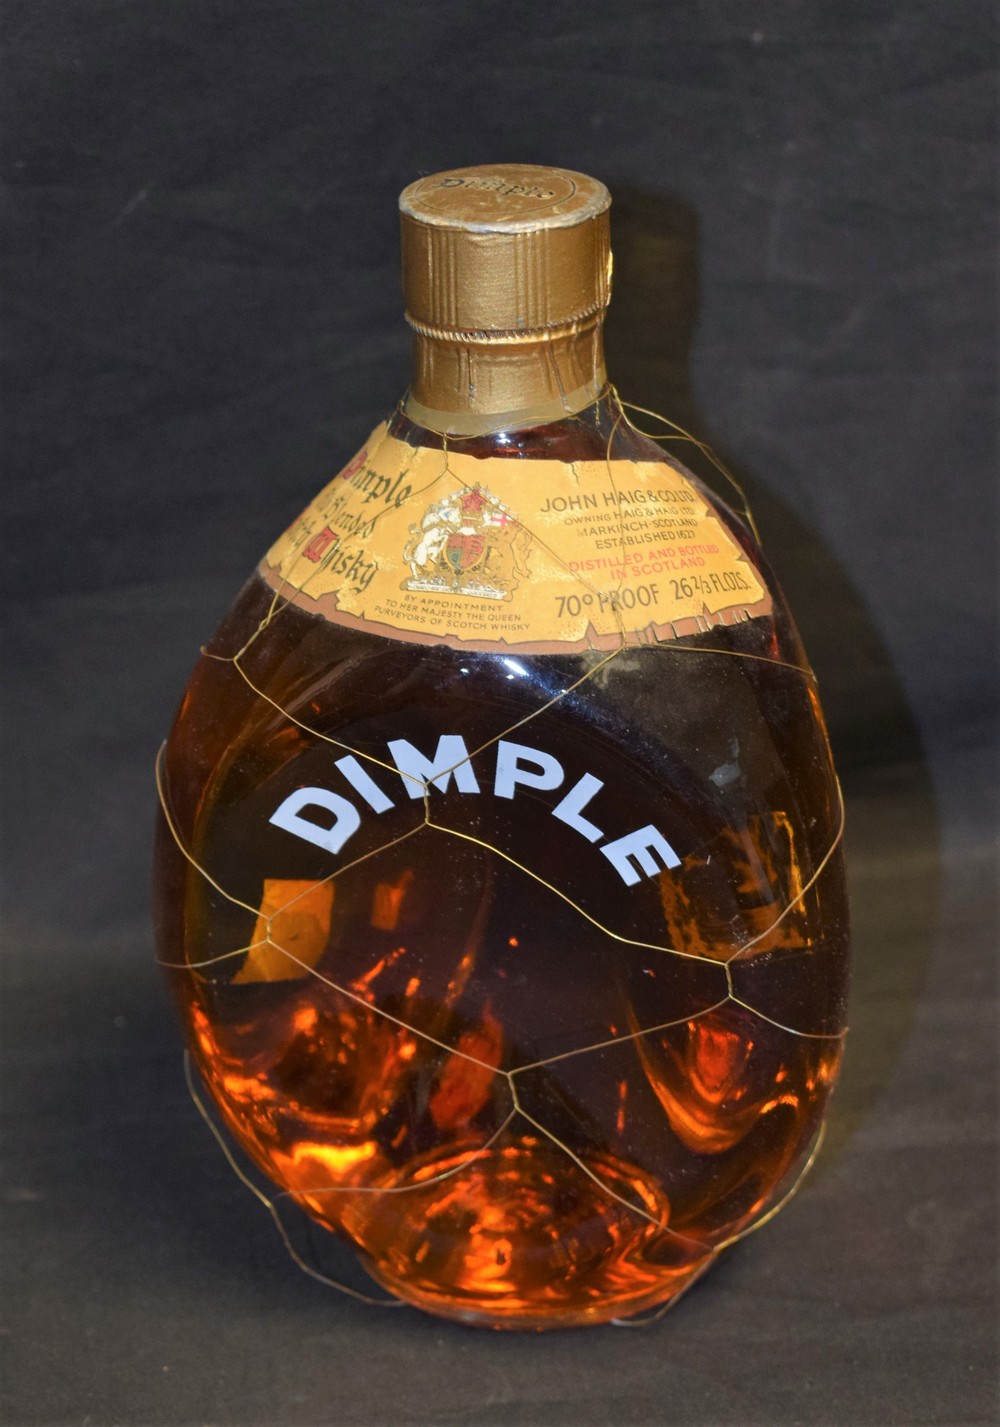 A mid 20th century bottle Dimple whisky,